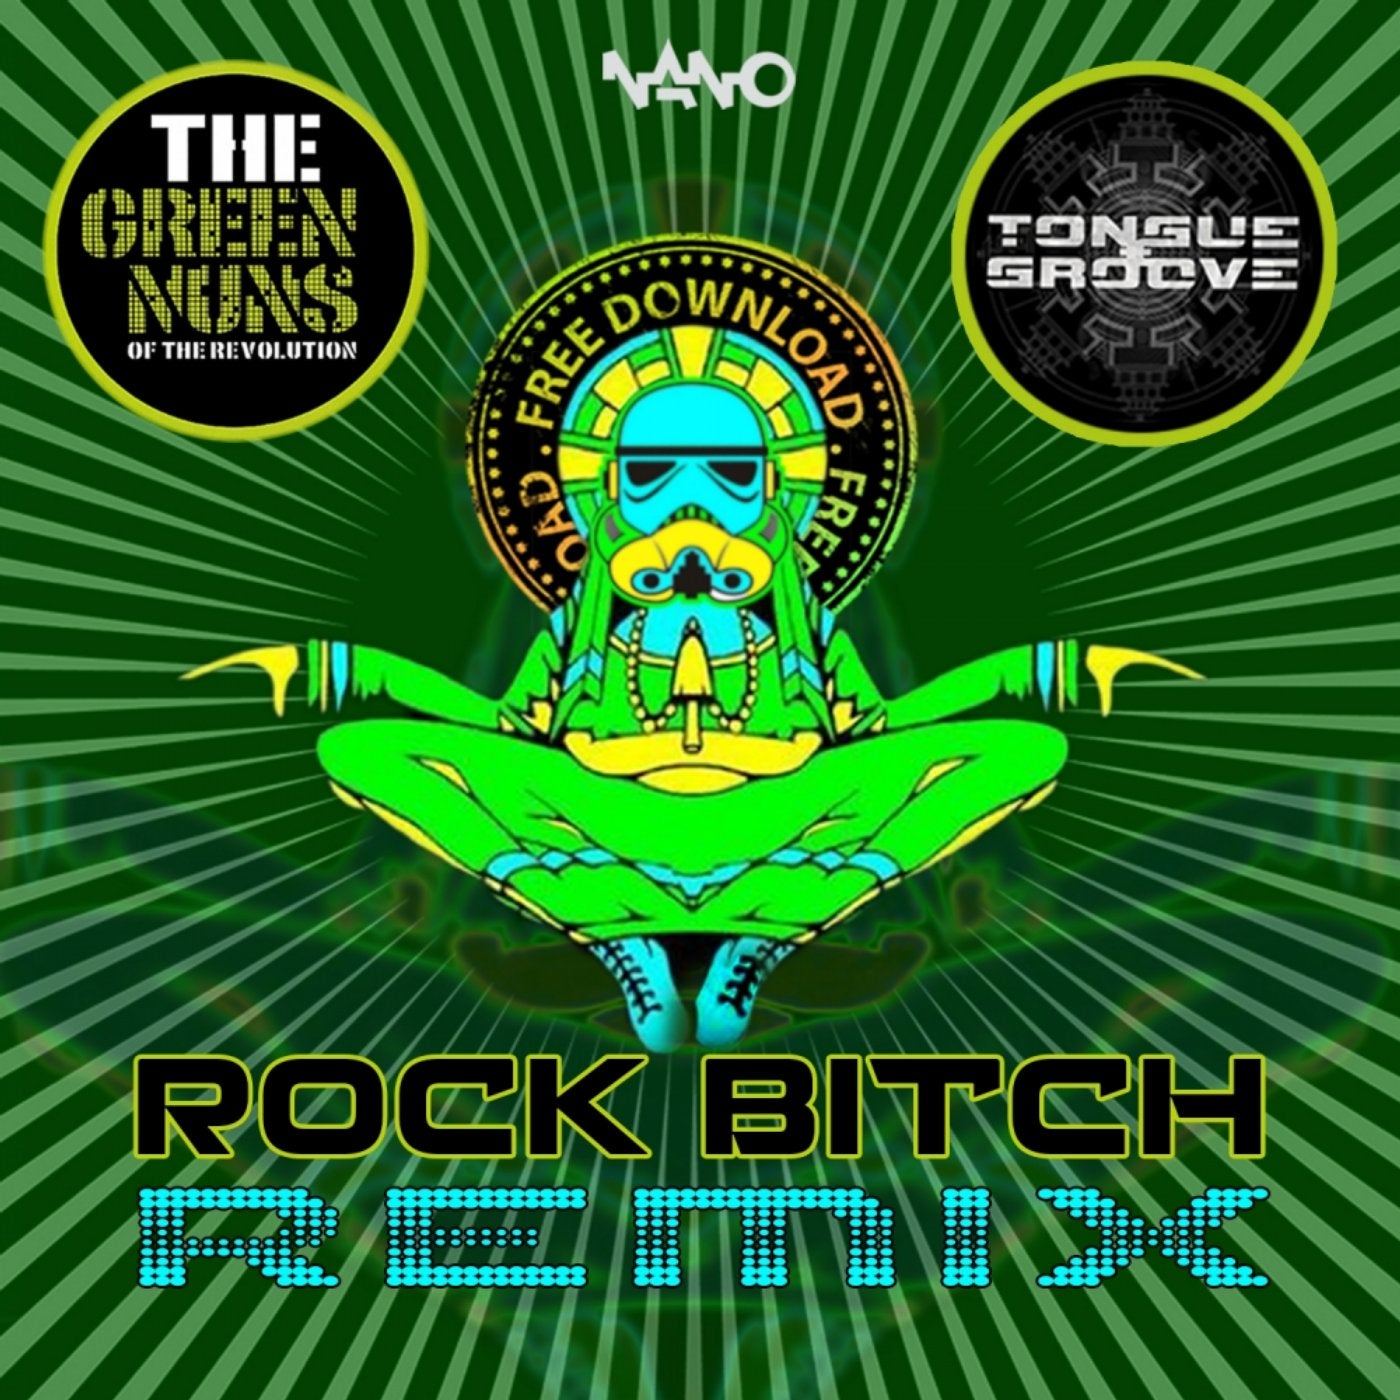 Green Nuns Of The Revolution Music & Downloads on Beatport